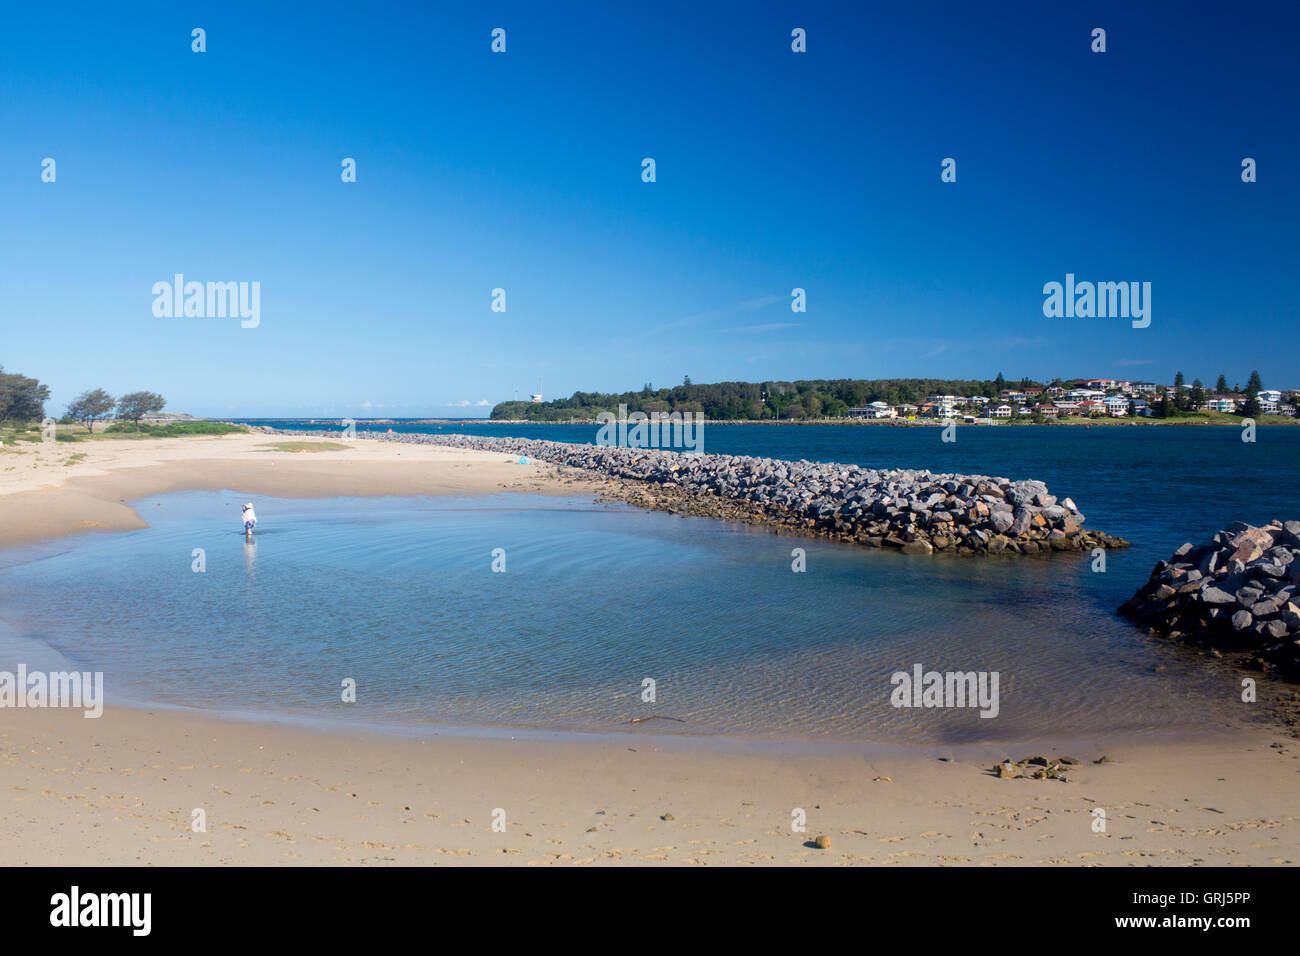 Granny's Pool, created by gap in breakwater, with view across to Swansea Heads Lake Macquarie New South Wales NSW Australia Stock Photo